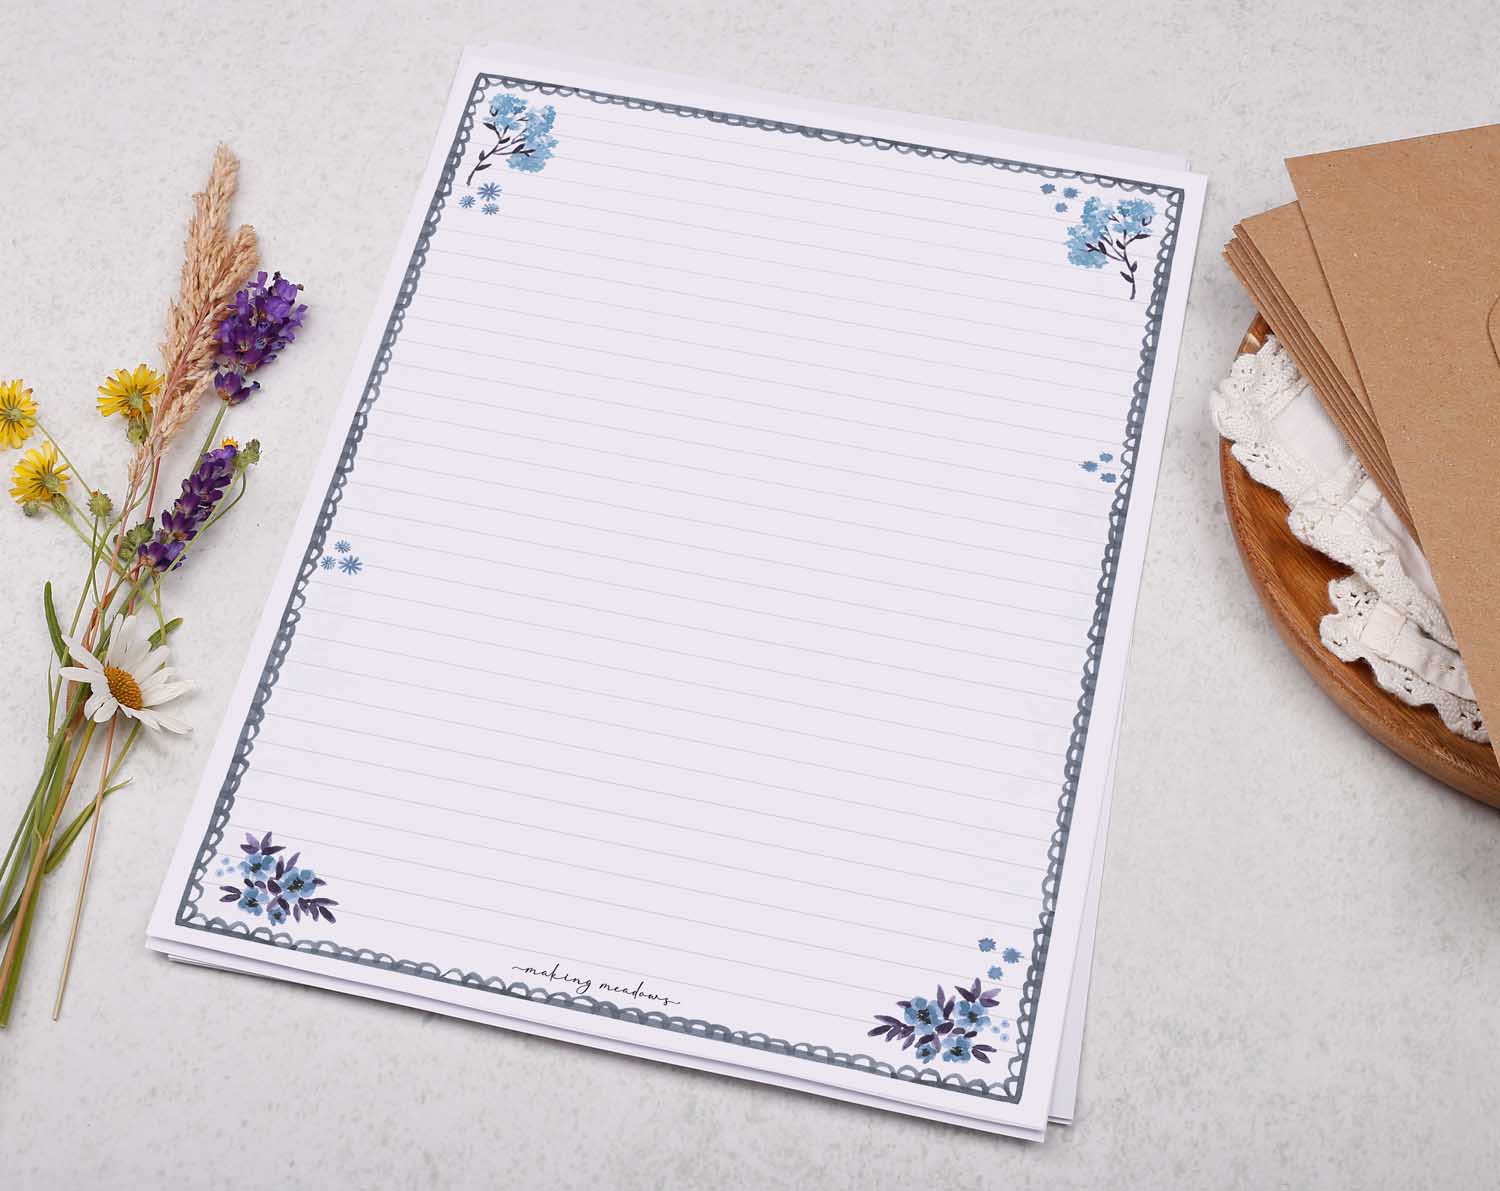 A4 letter writing paper sheets with a delicate blue floral border and scalloped edge design. 